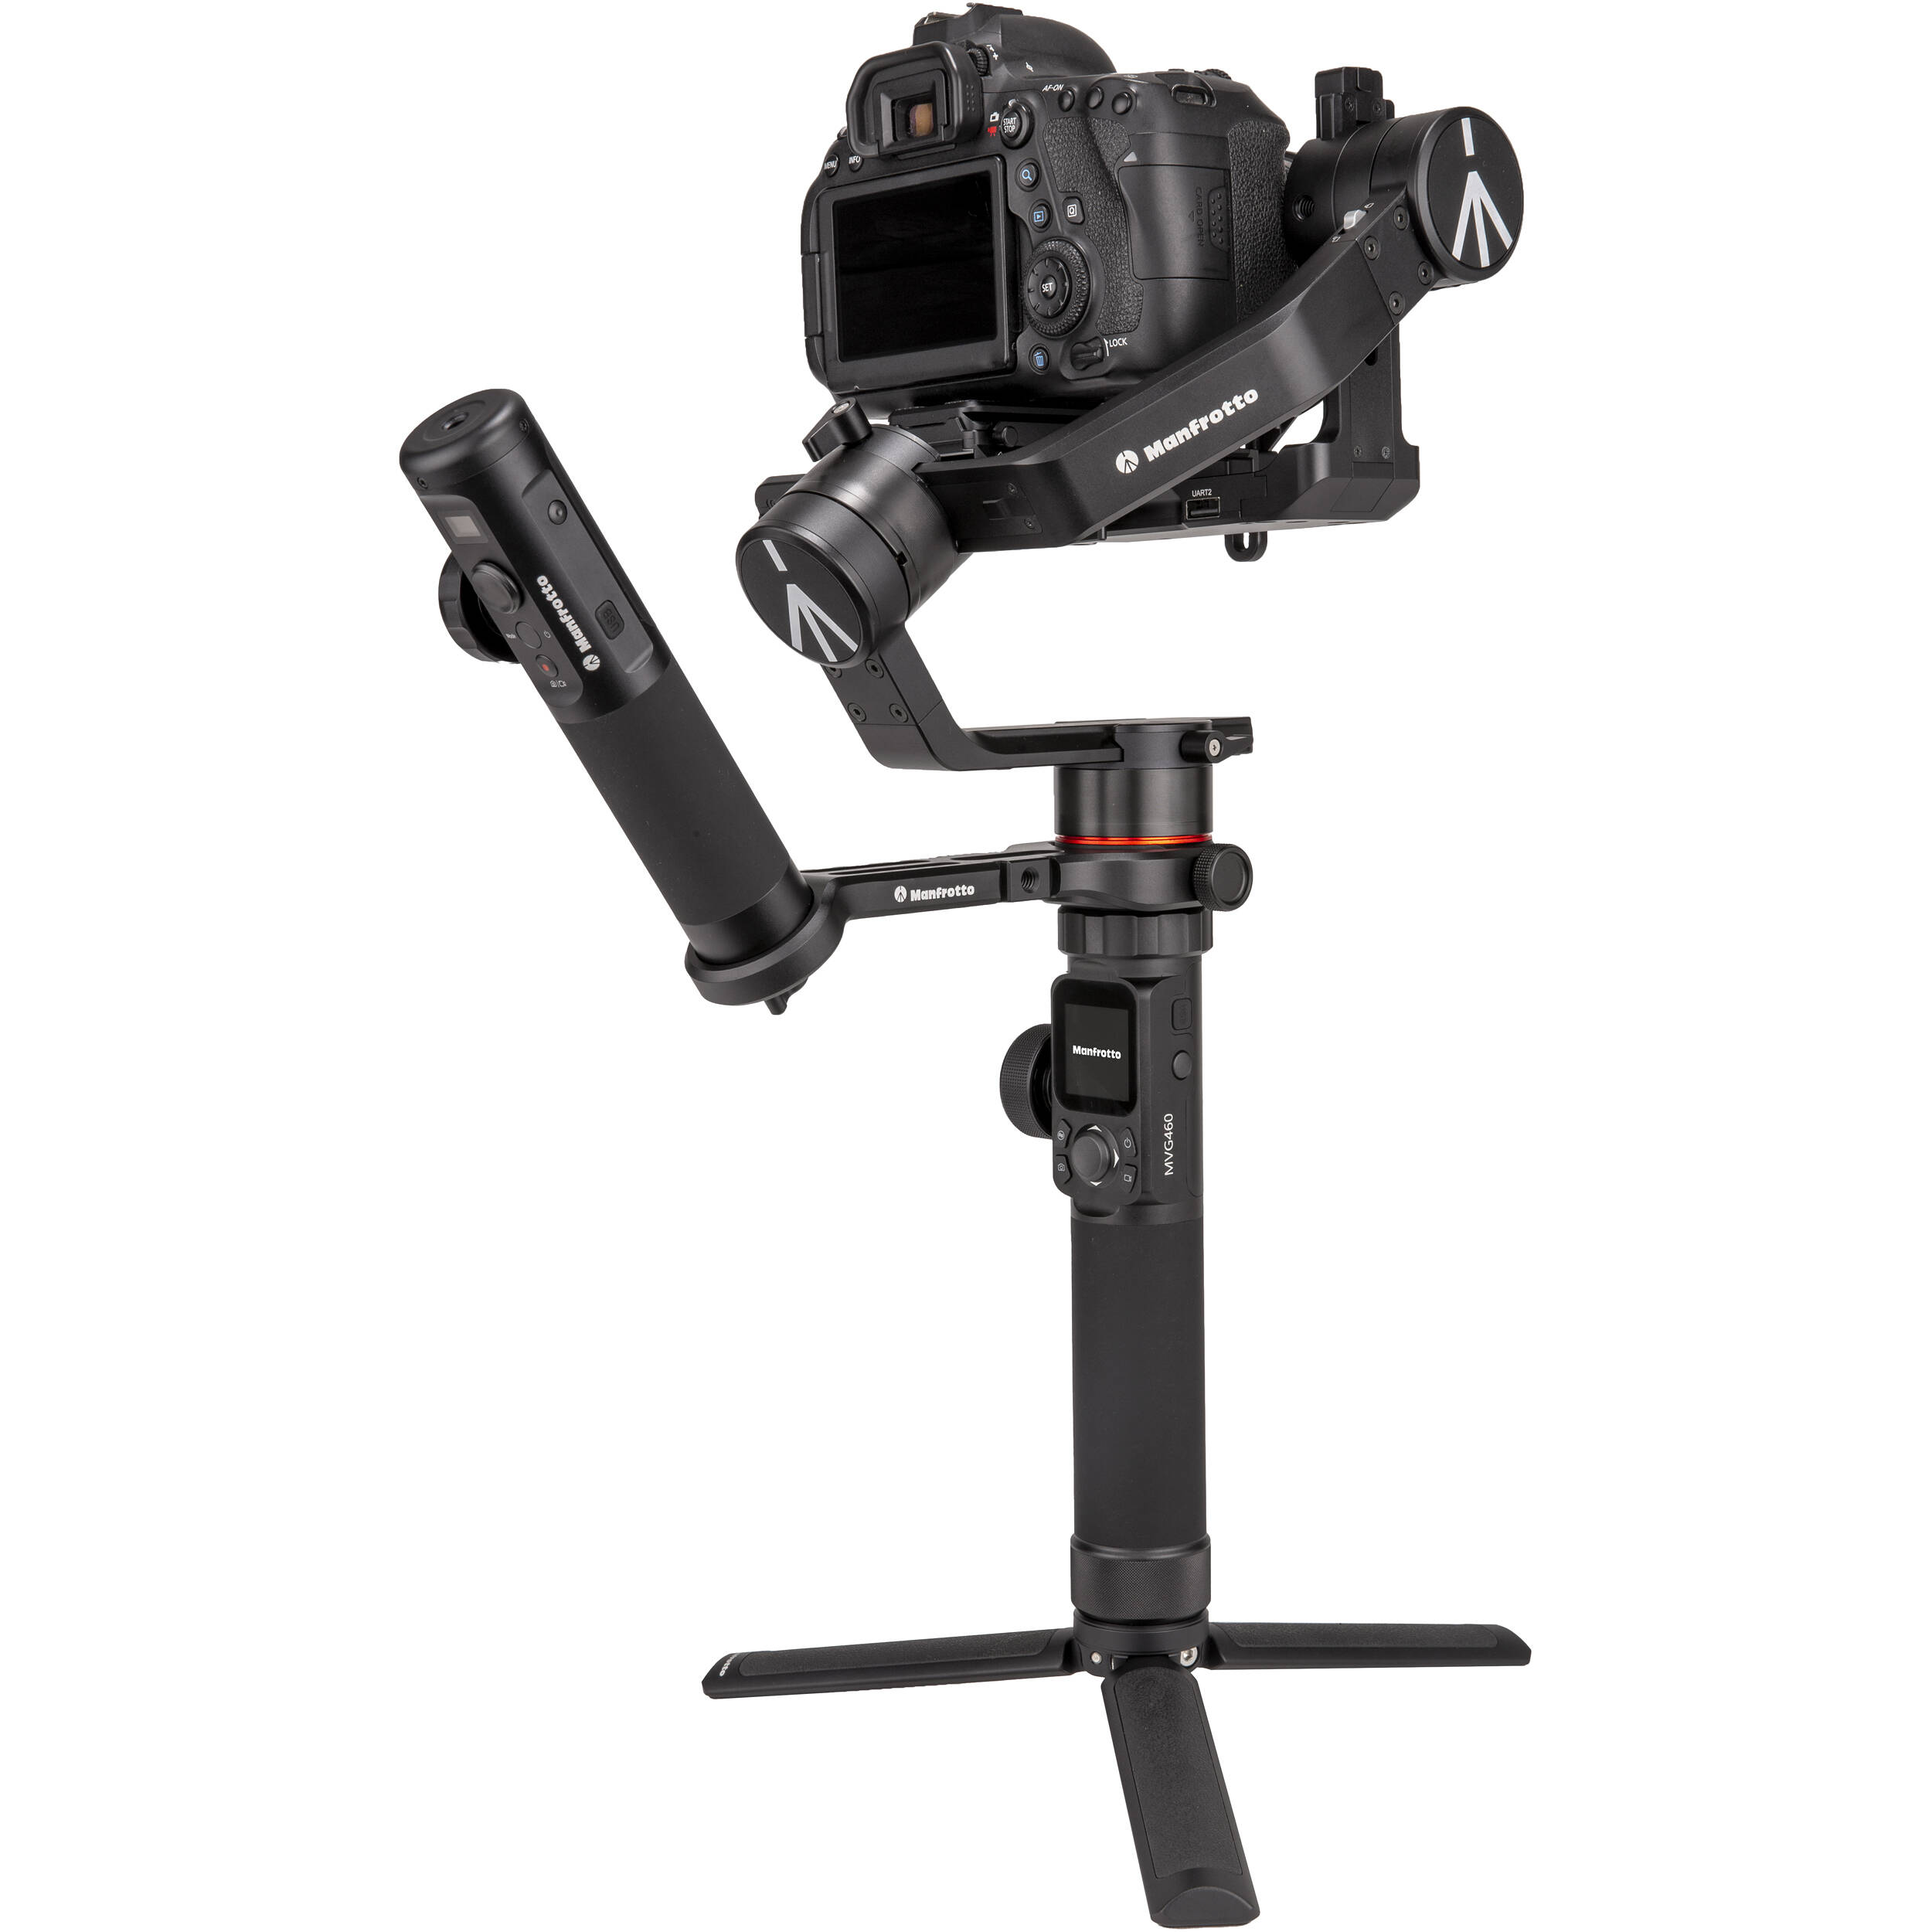 Manfrotto Remote Control for Gimbal